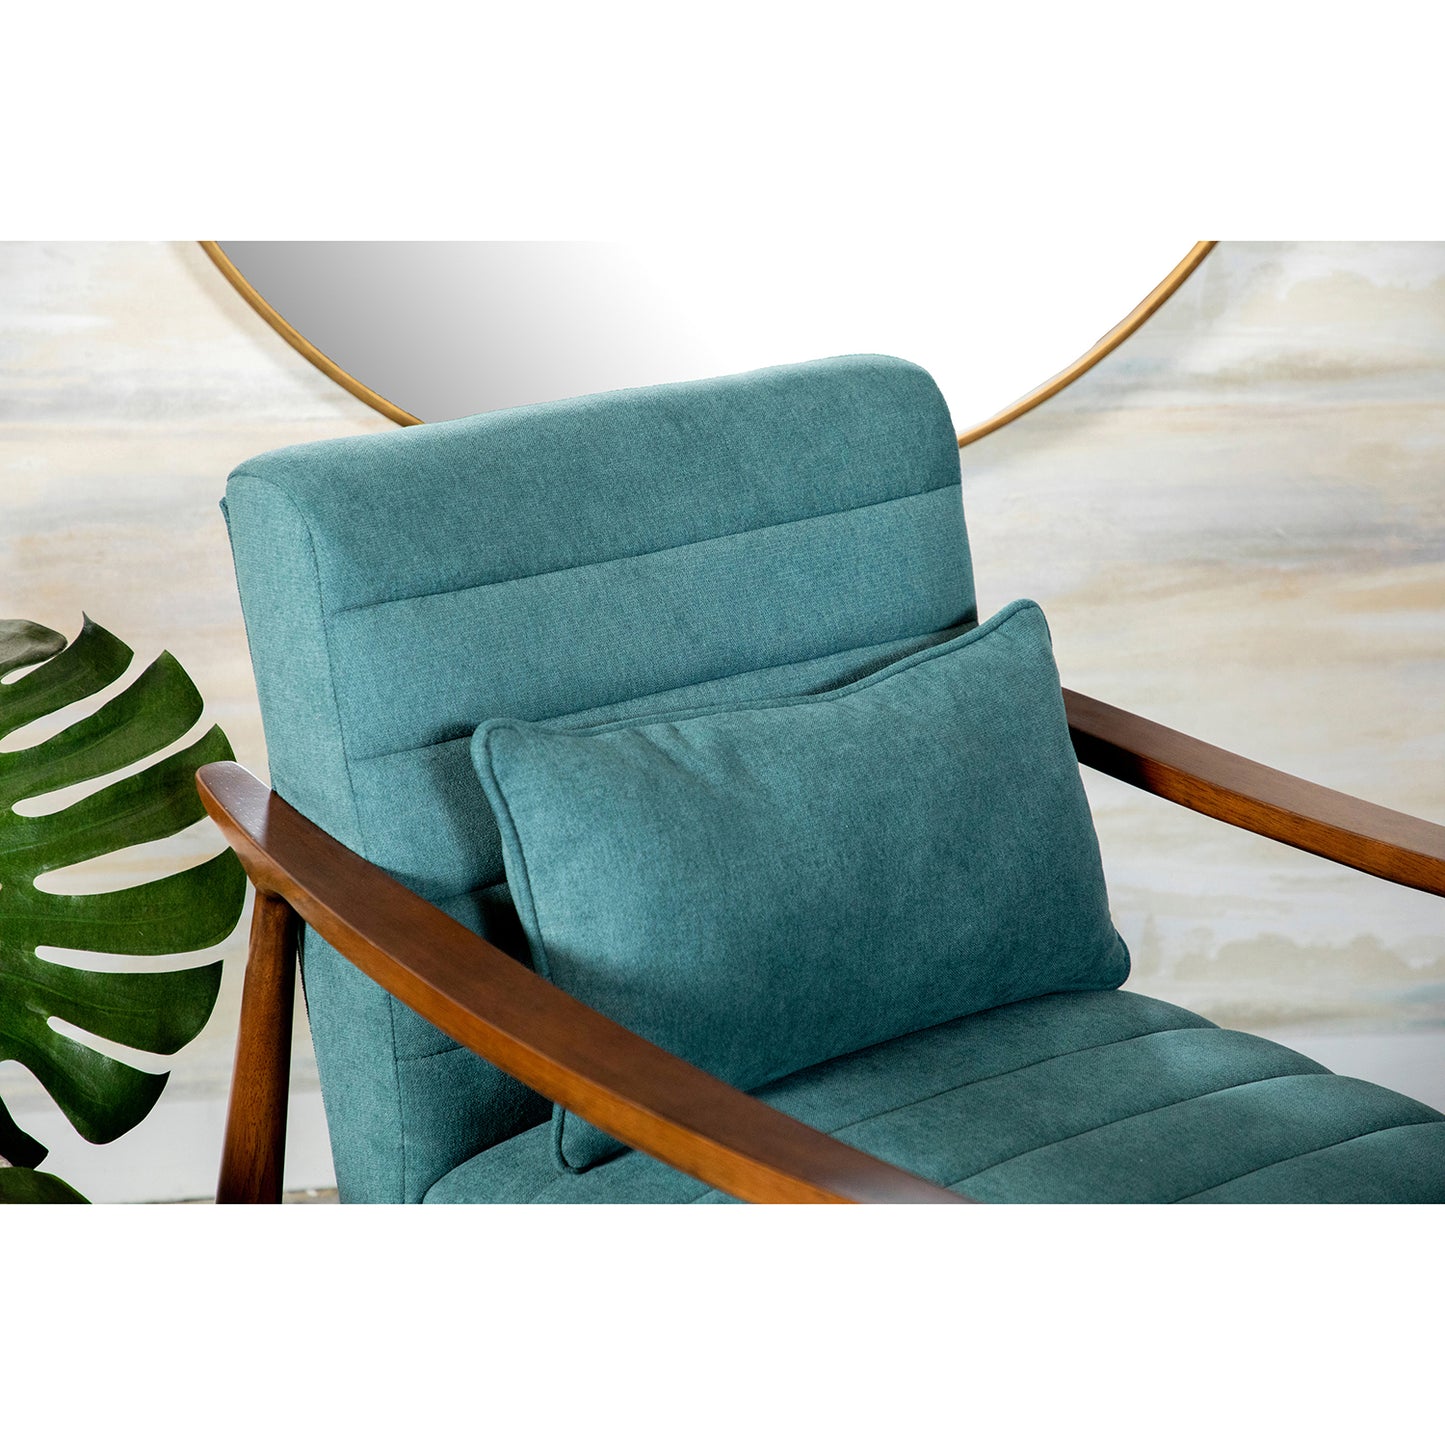 Wooden Arm Accent Chair Teal and Walnut